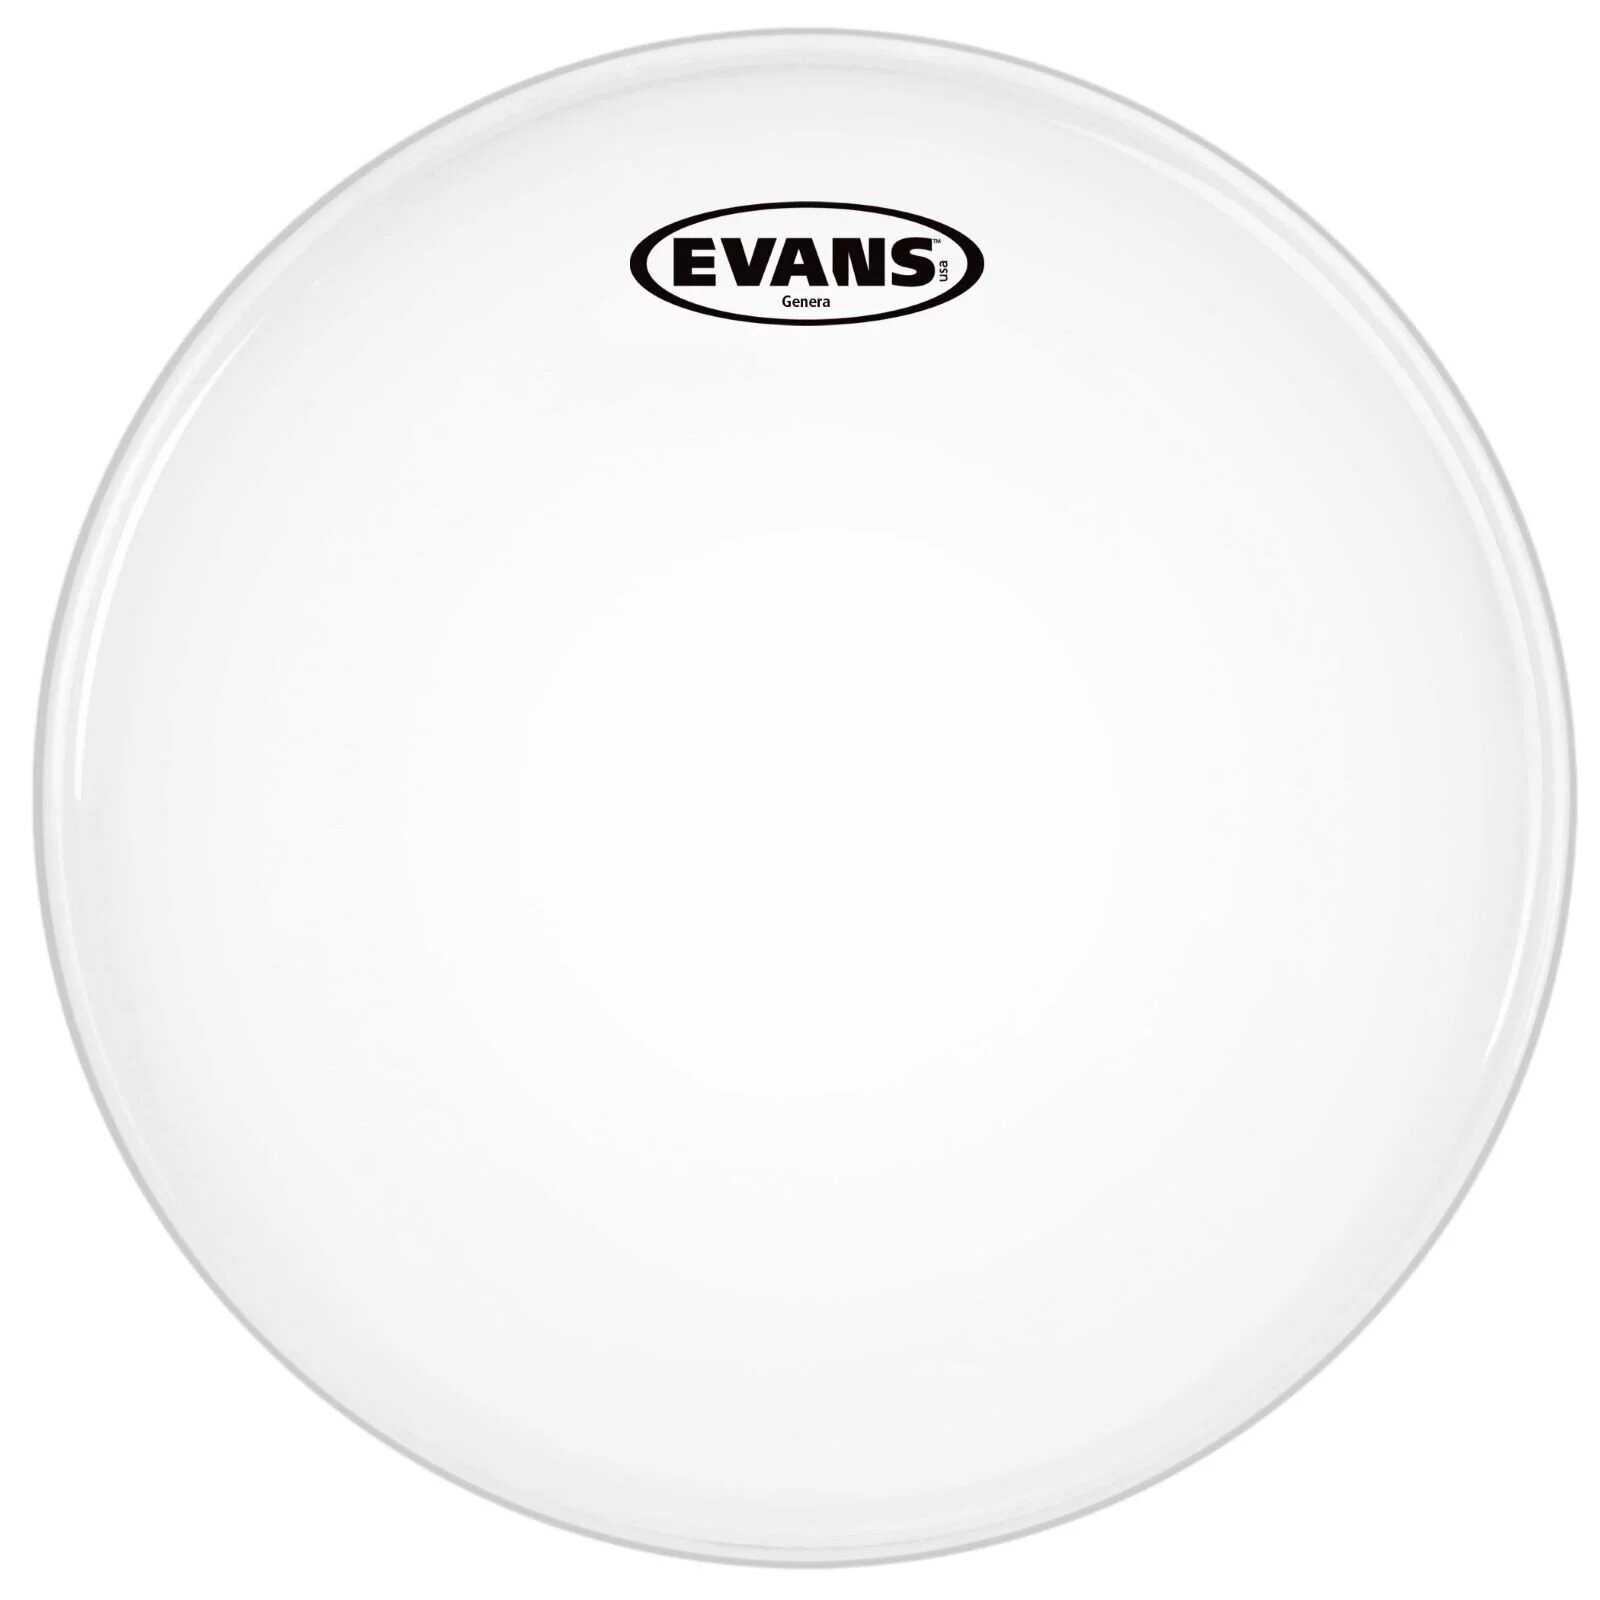 Evans Genera snare batter with muffle ring single ply coated white 14